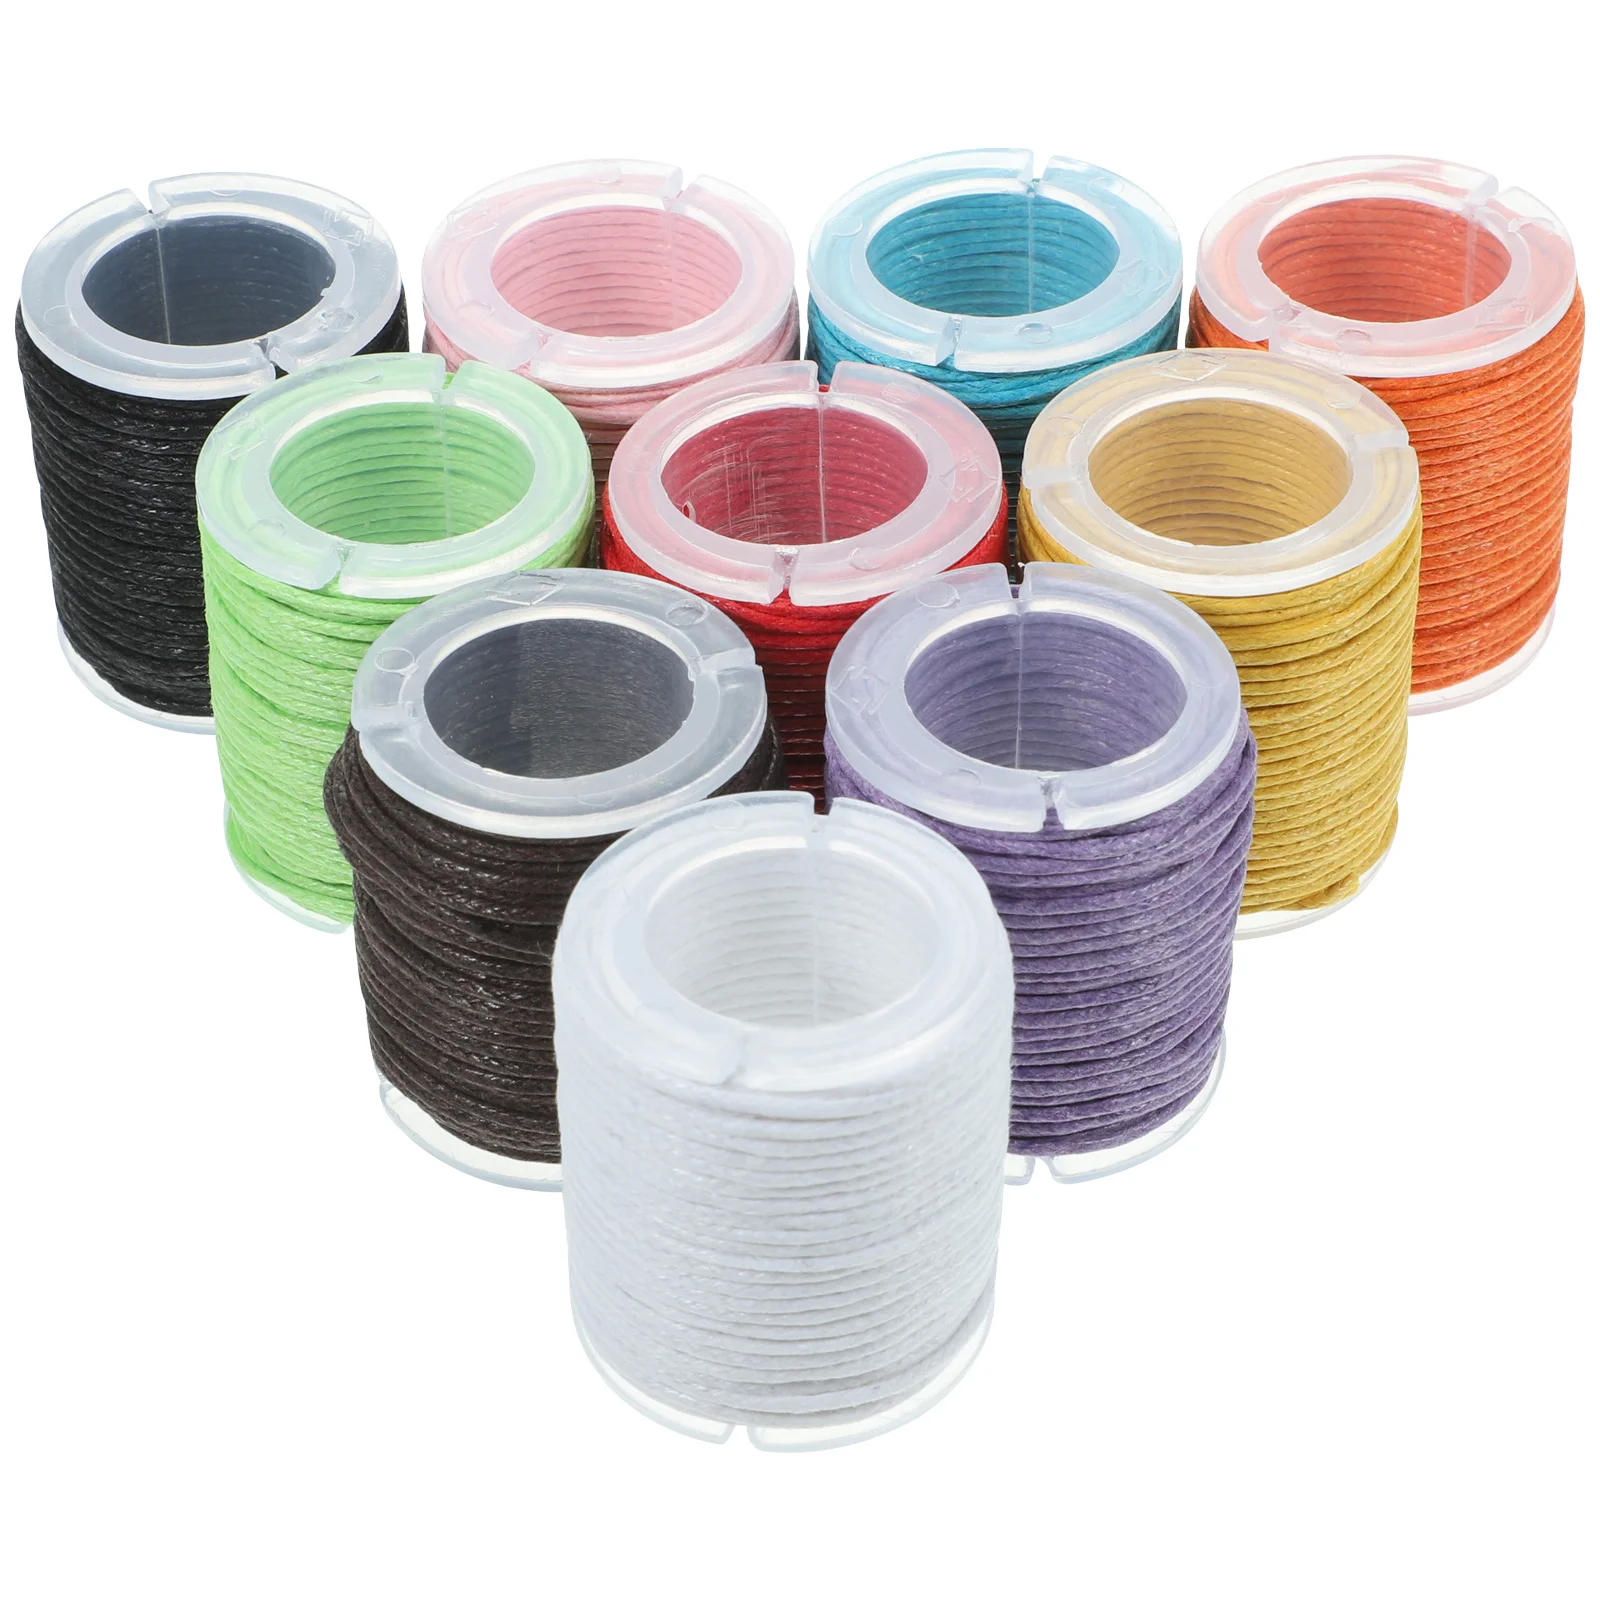 

10 Rolls Bracelet String 1Mm Waxed Cotton Cord DIY Wax Thread 10M Length Jewelry Craft Making 10 Colors